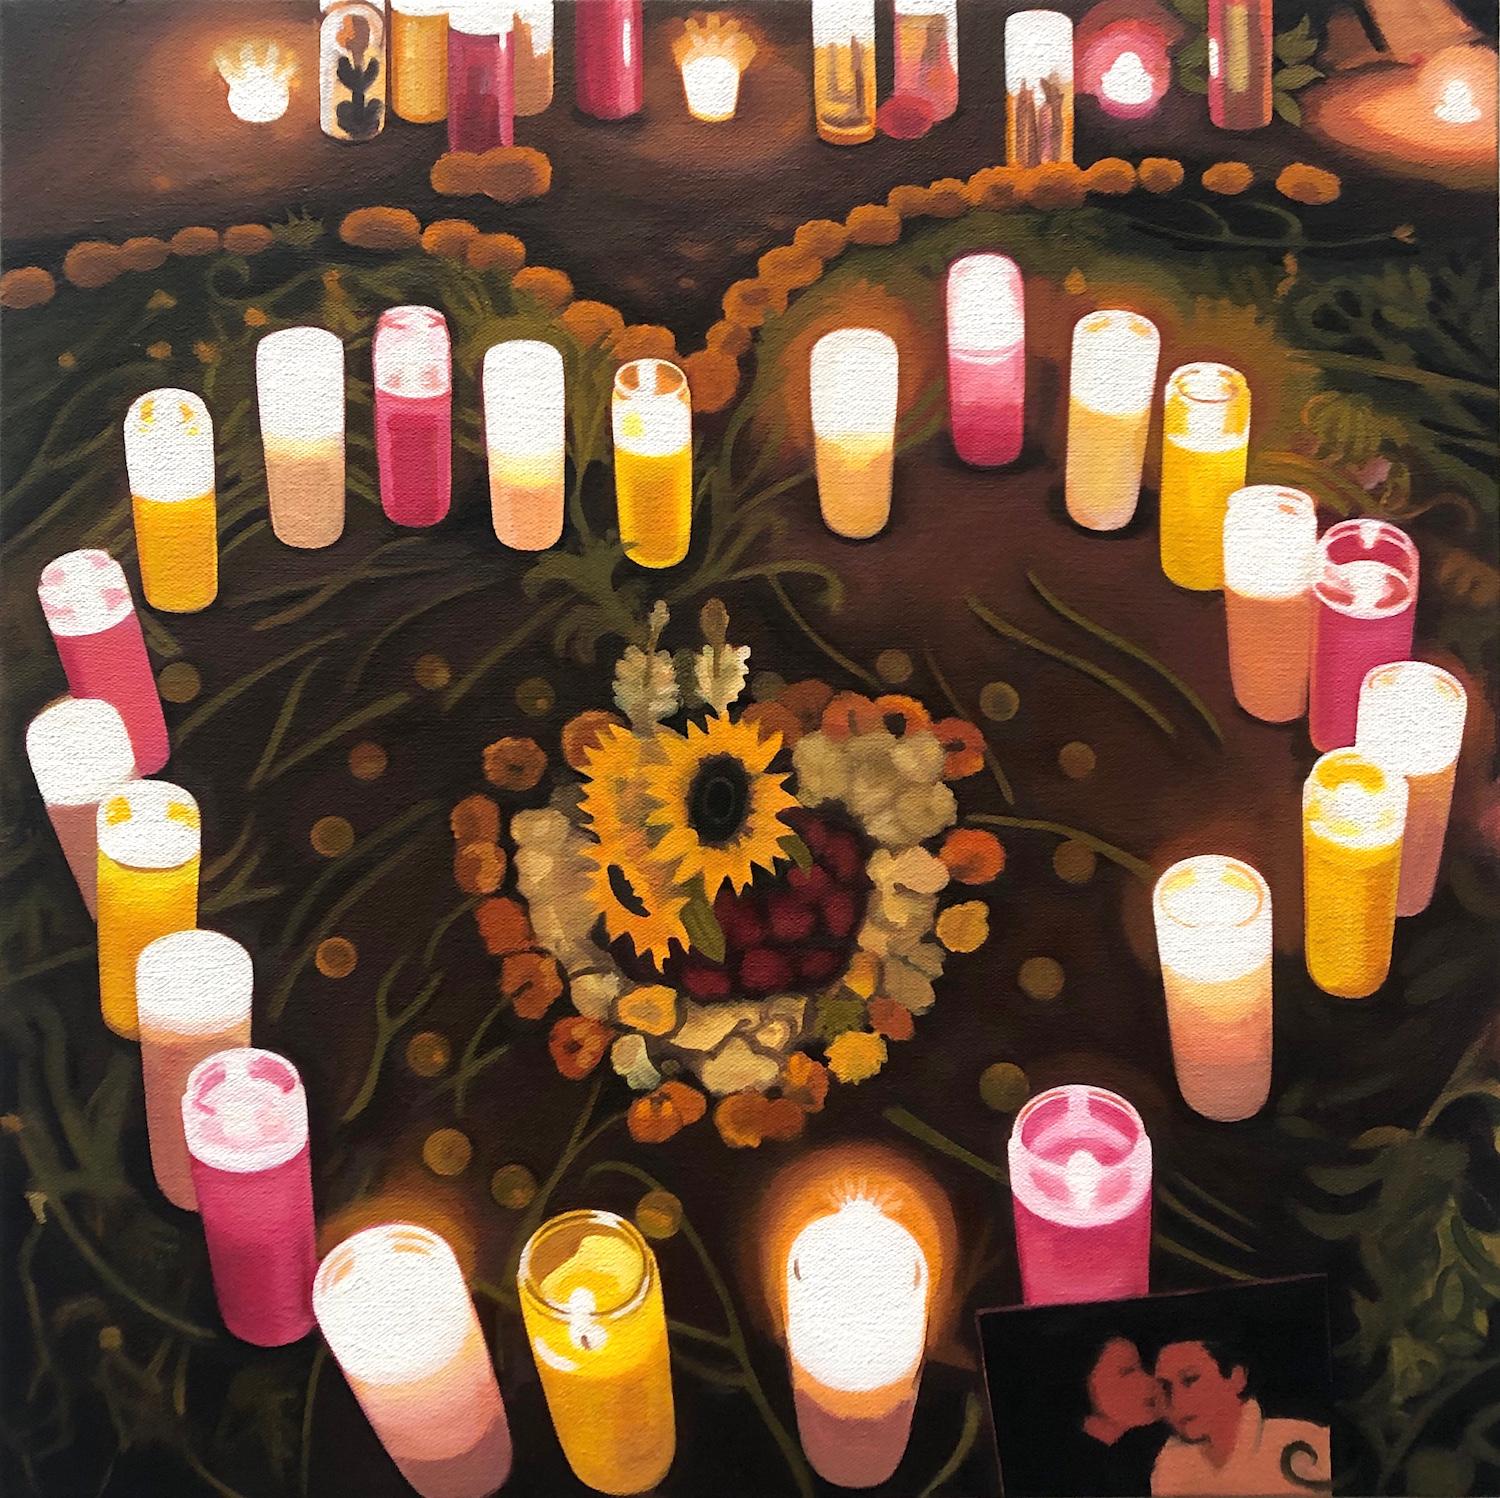 Heart of Candles, Oil Painting - Art by Hadley Northrop